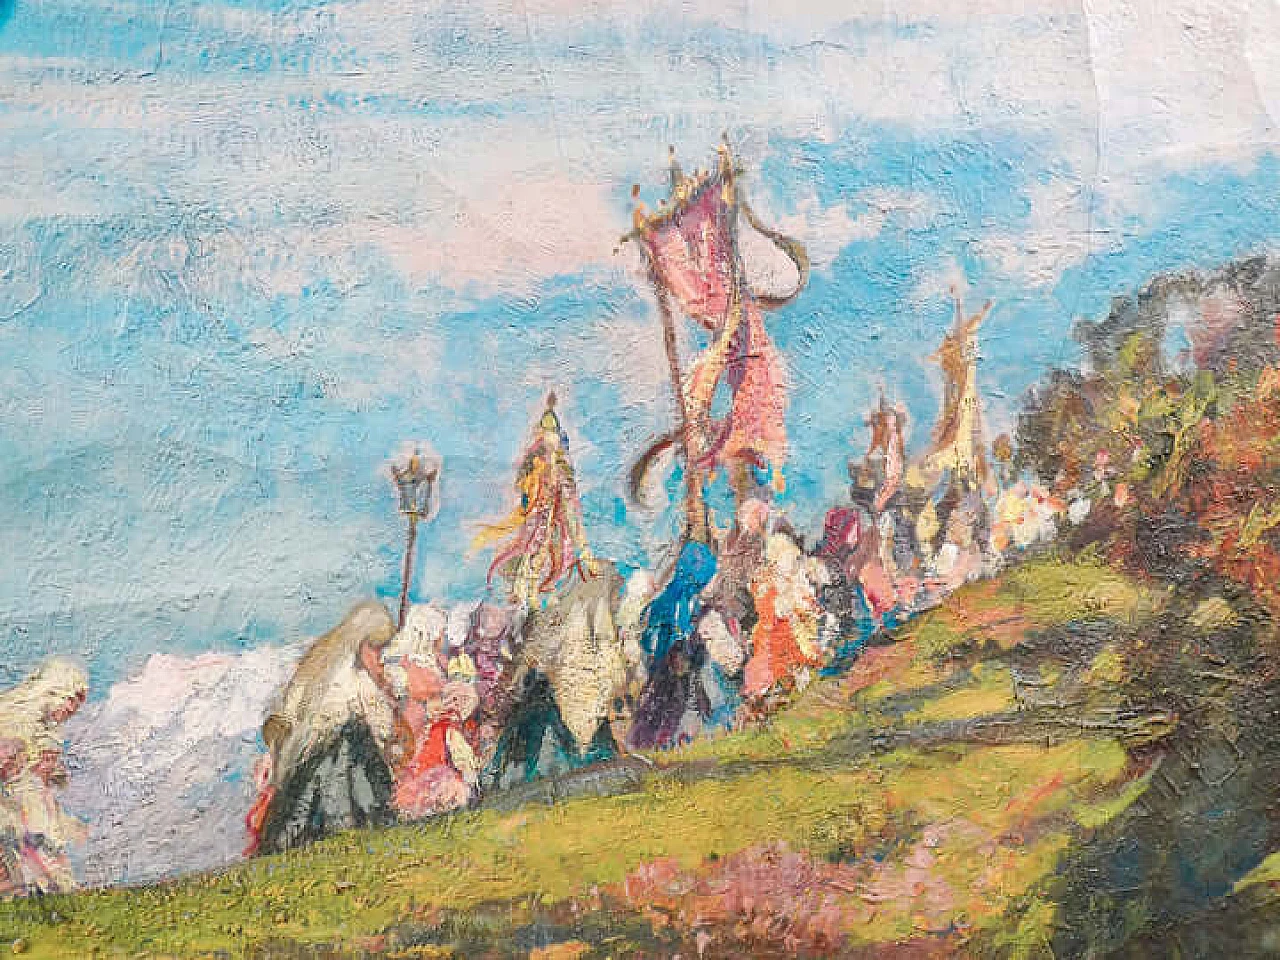 Mario Gachet, Procession in Frassineto Canavese, oil painting on canvas, early 20th century 4